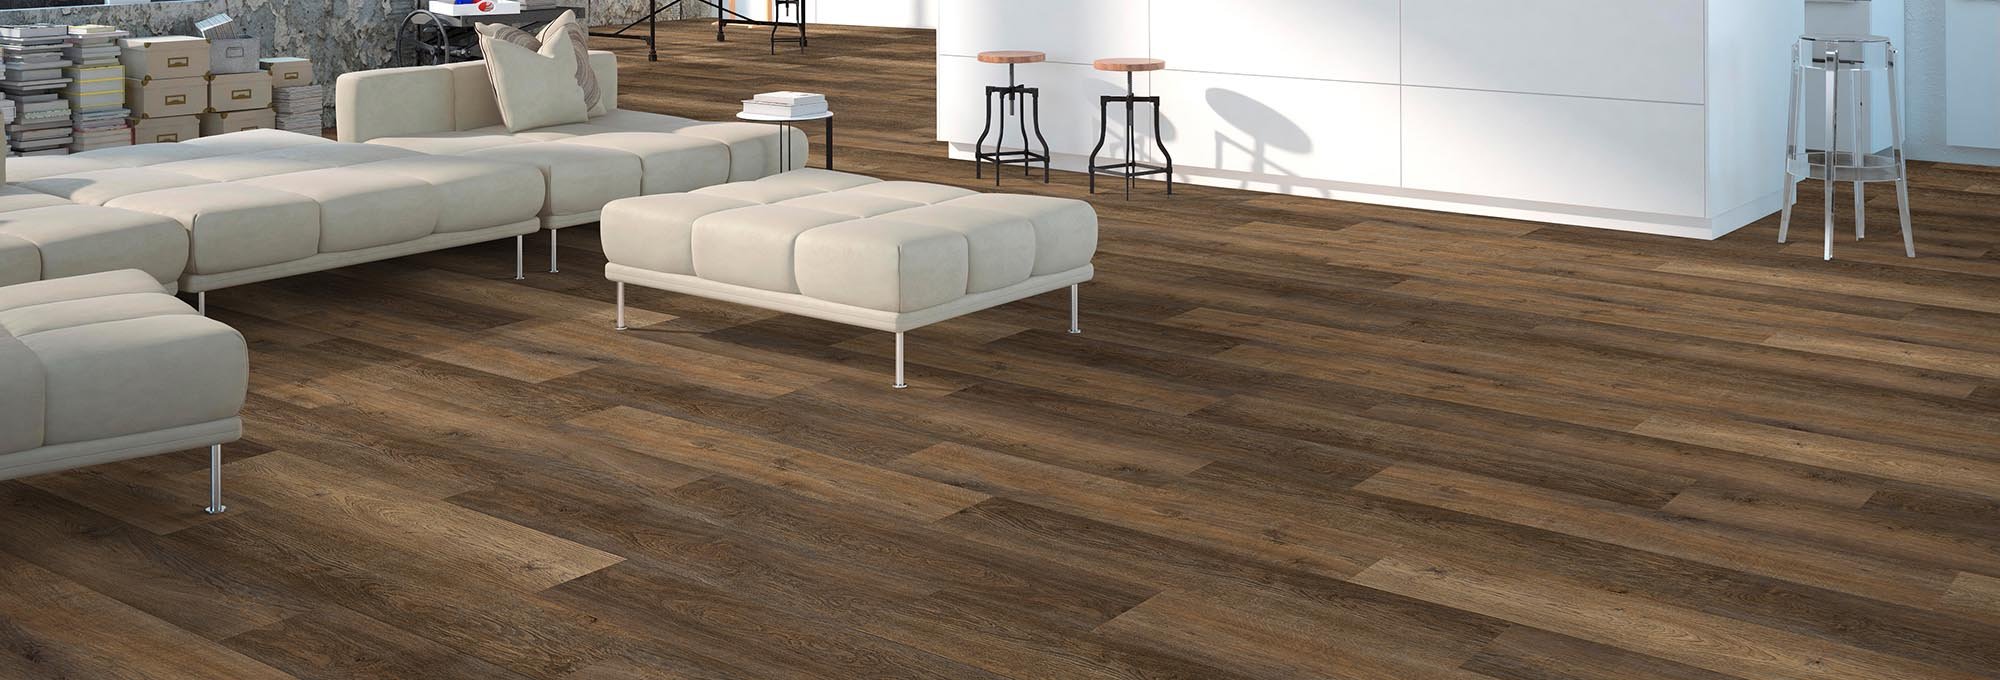 Shop Flooring Products from Howard Young Flooring in Milton, FL